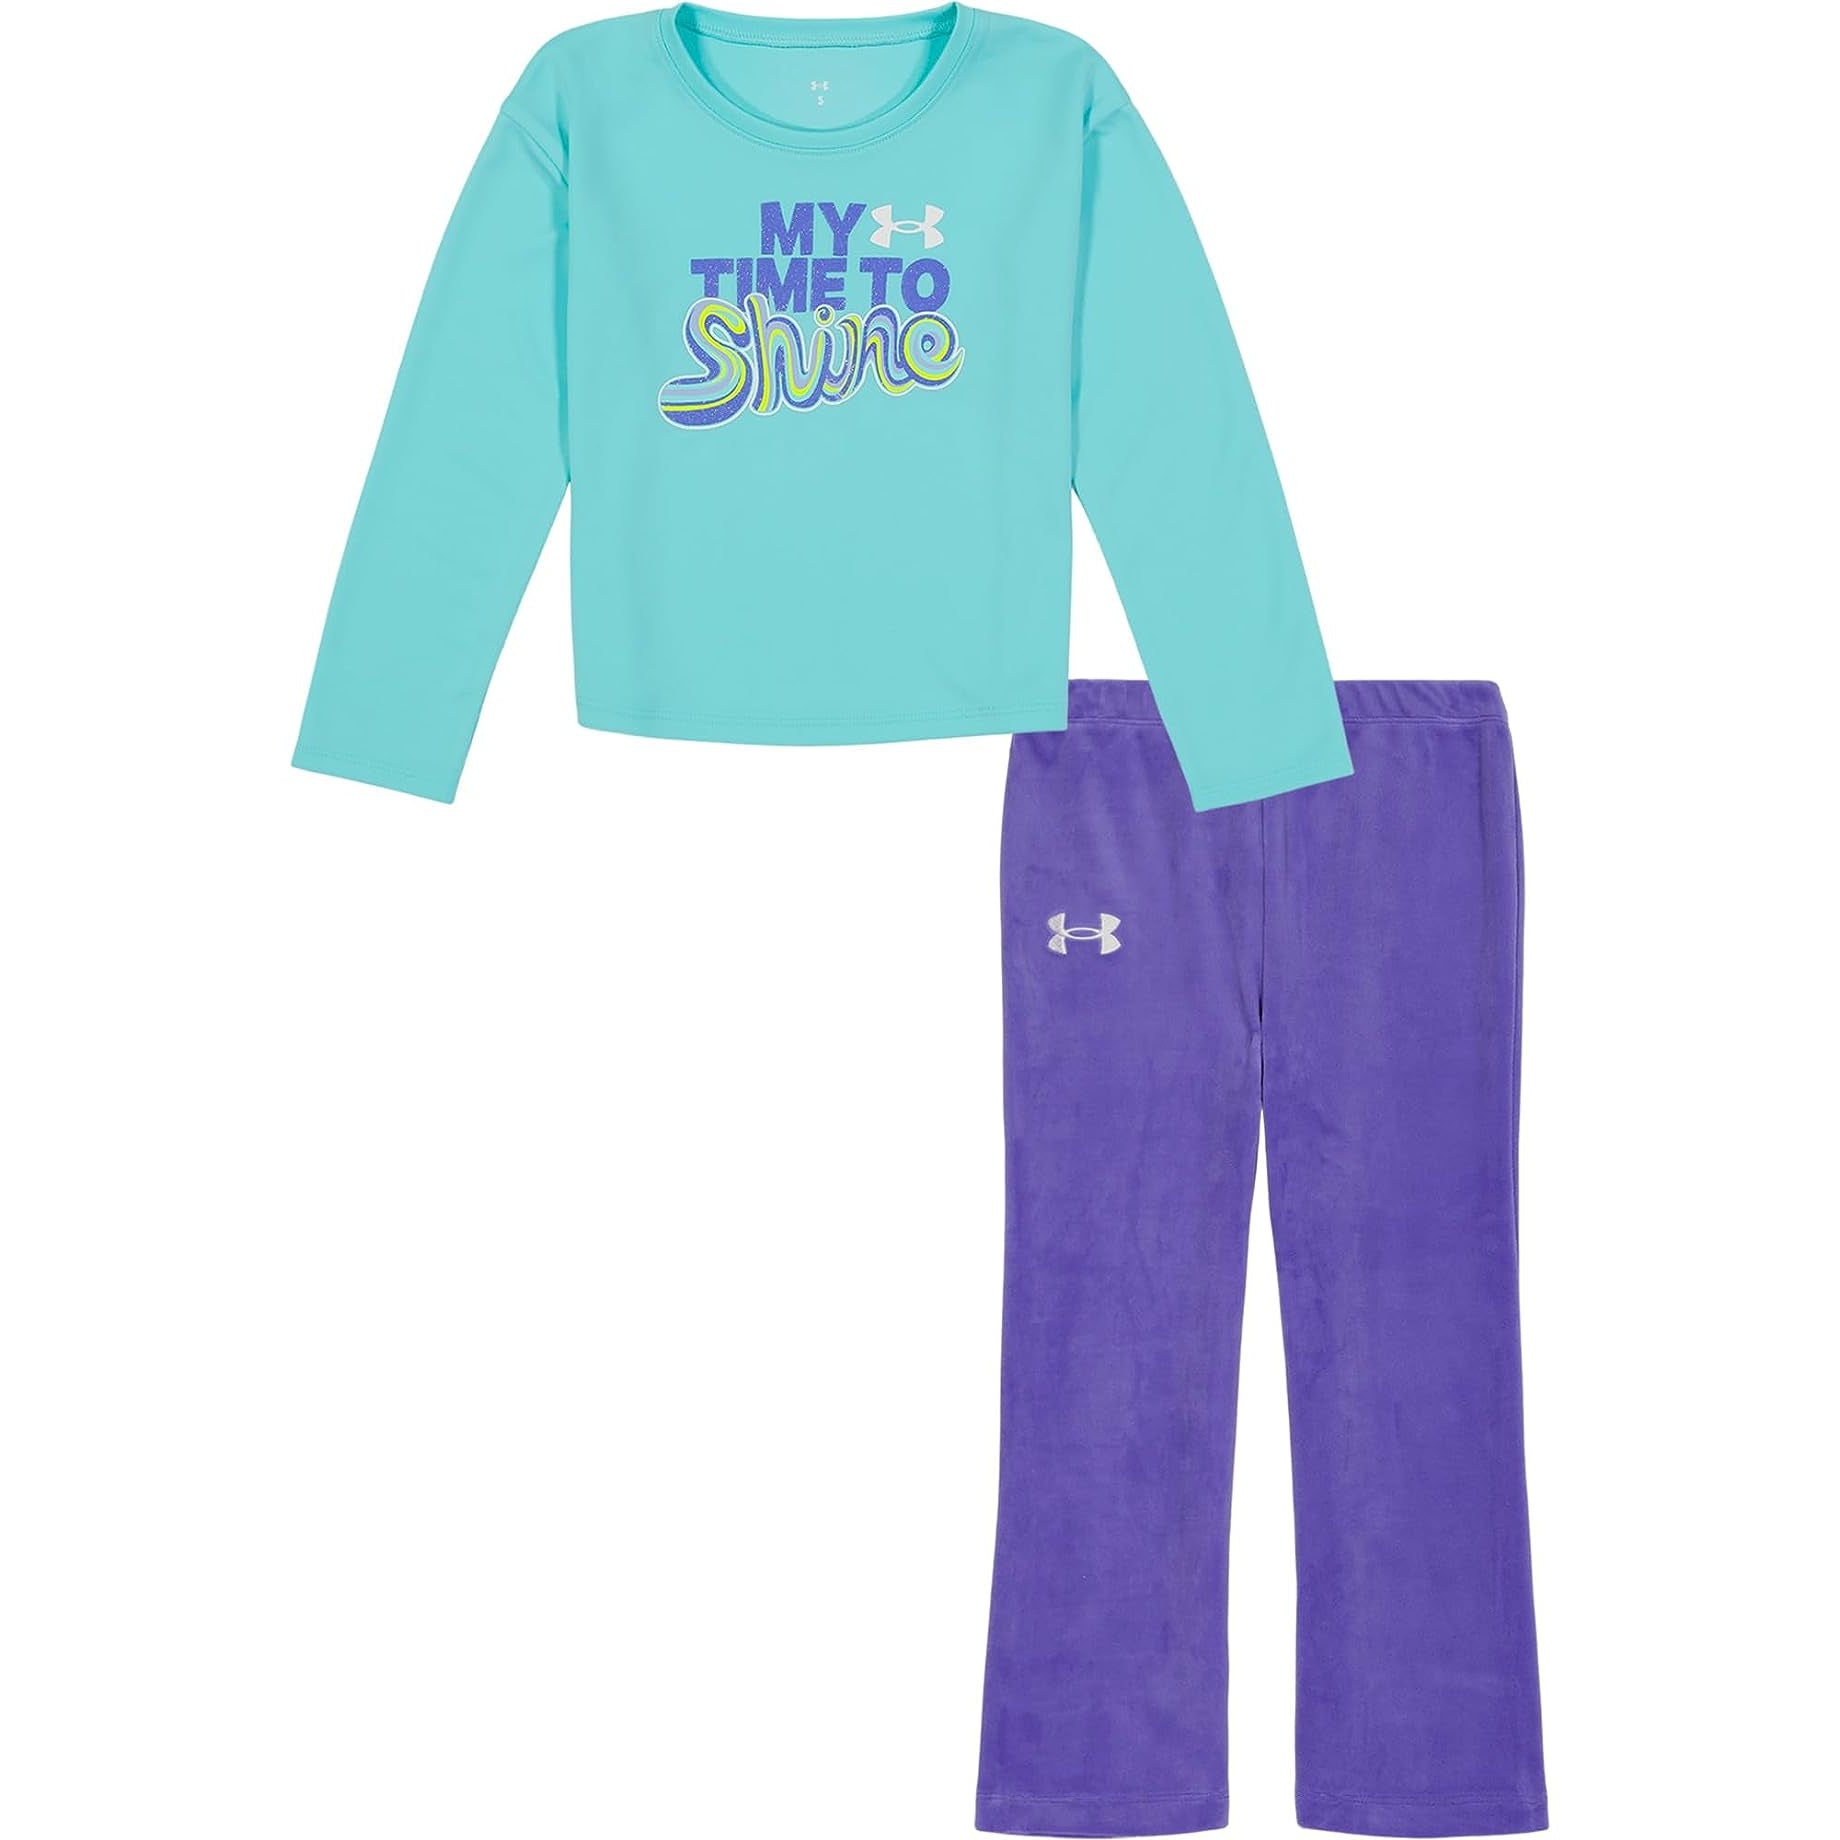 Under Armour Girls' UA My Time to Shine Set - Neo Turquoise-UNDER ARMOUR-Little Giant Kidz